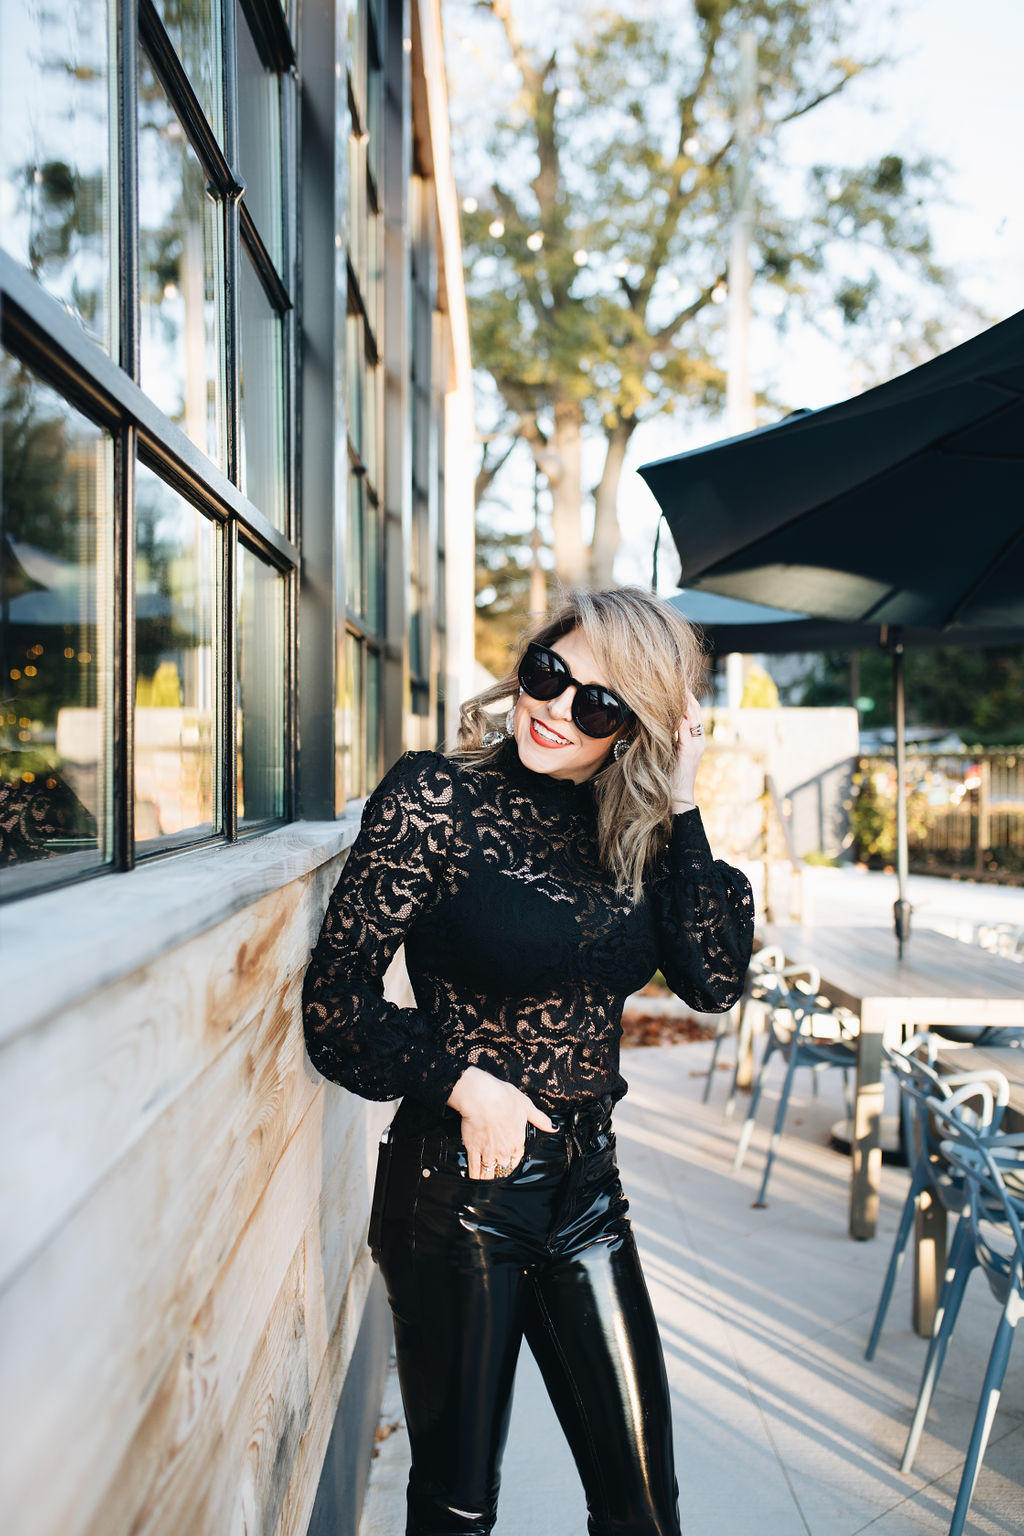 Who else is ready for Spring? Blogger Life Lutzurious gives you her Spring fashion picks from tops to dresses to work wear to splurge, including this black lace top and Karen Walker sunglasses.